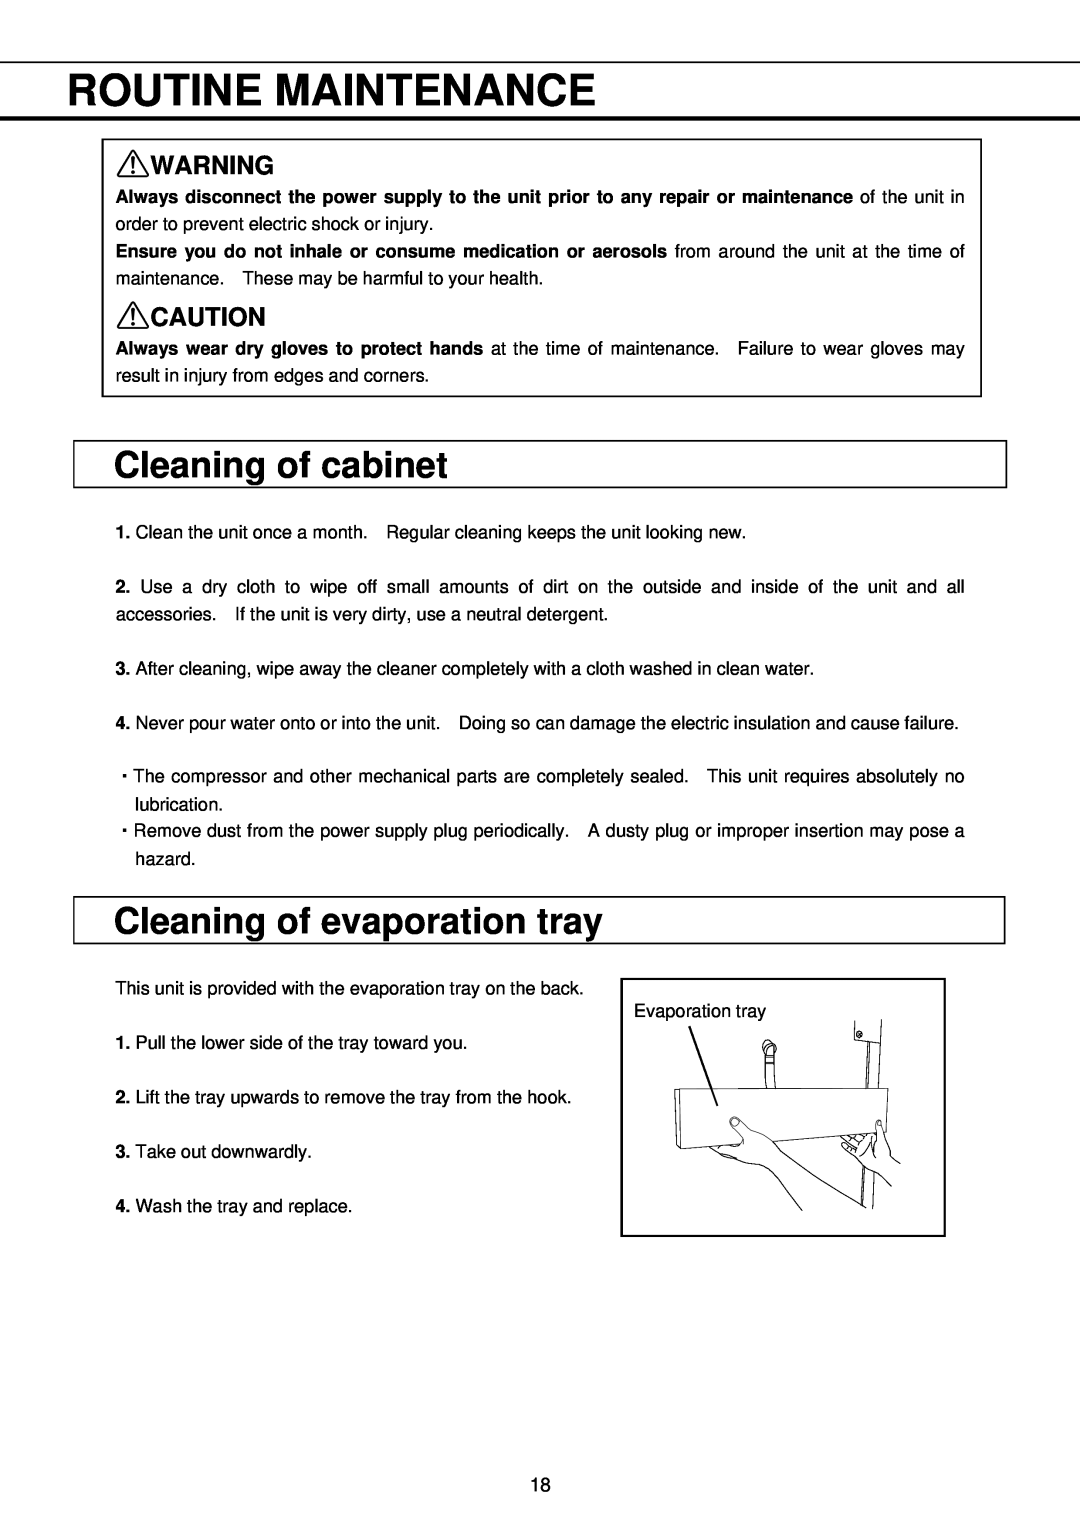 Sanyo MBR-704GR instruction manual Routine Maintenance, Cleaning of cabinet, Cleaning of evaporation tray 